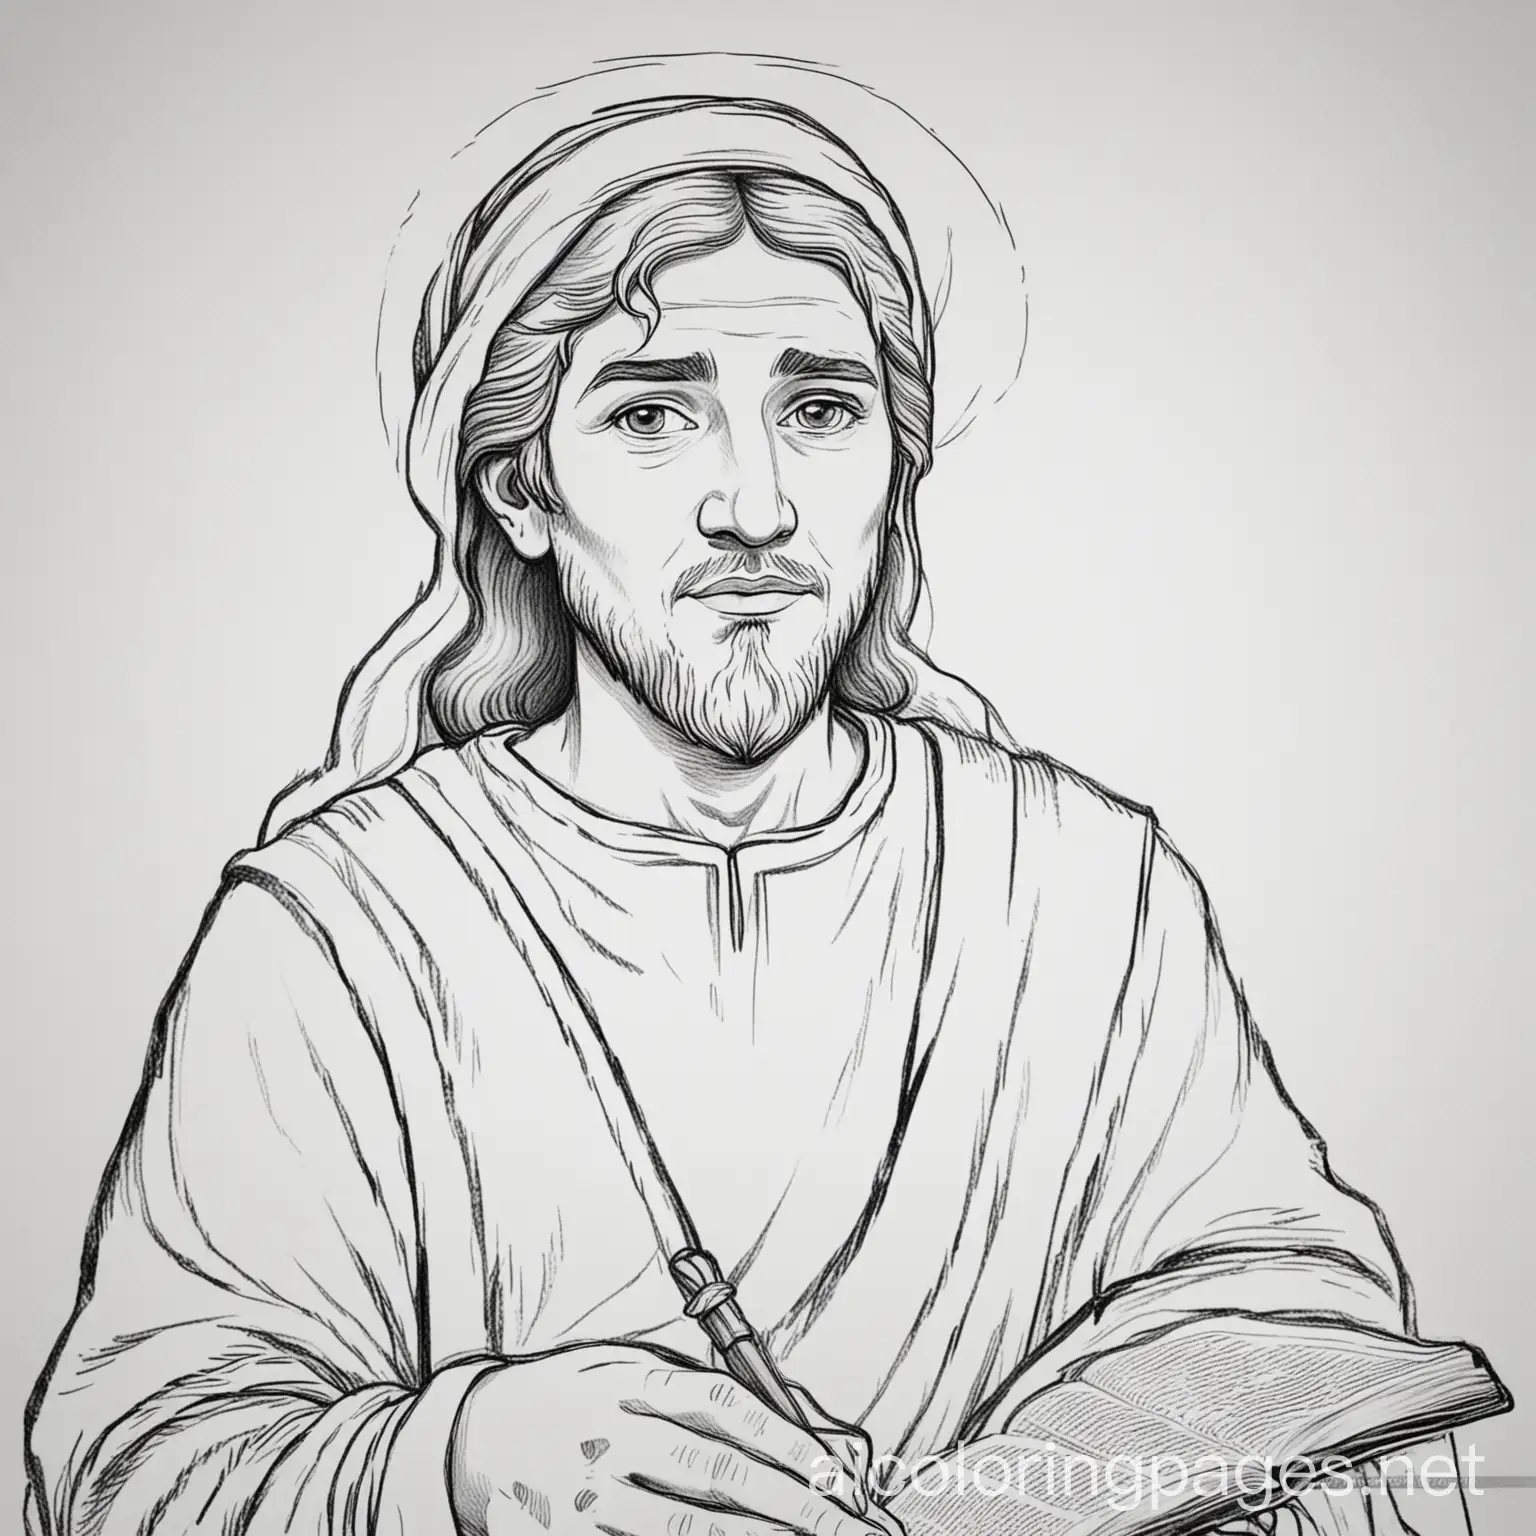 James the disciple of the bible black and white coloring page no background, Coloring Page, black and white, line art, white background, Simplicity, Ample White Space. The background of the coloring page is plain white to make it easy for young children to color within the lines. The outlines of all the subjects are easy to distinguish, making it simple for kids to color without too much difficulty